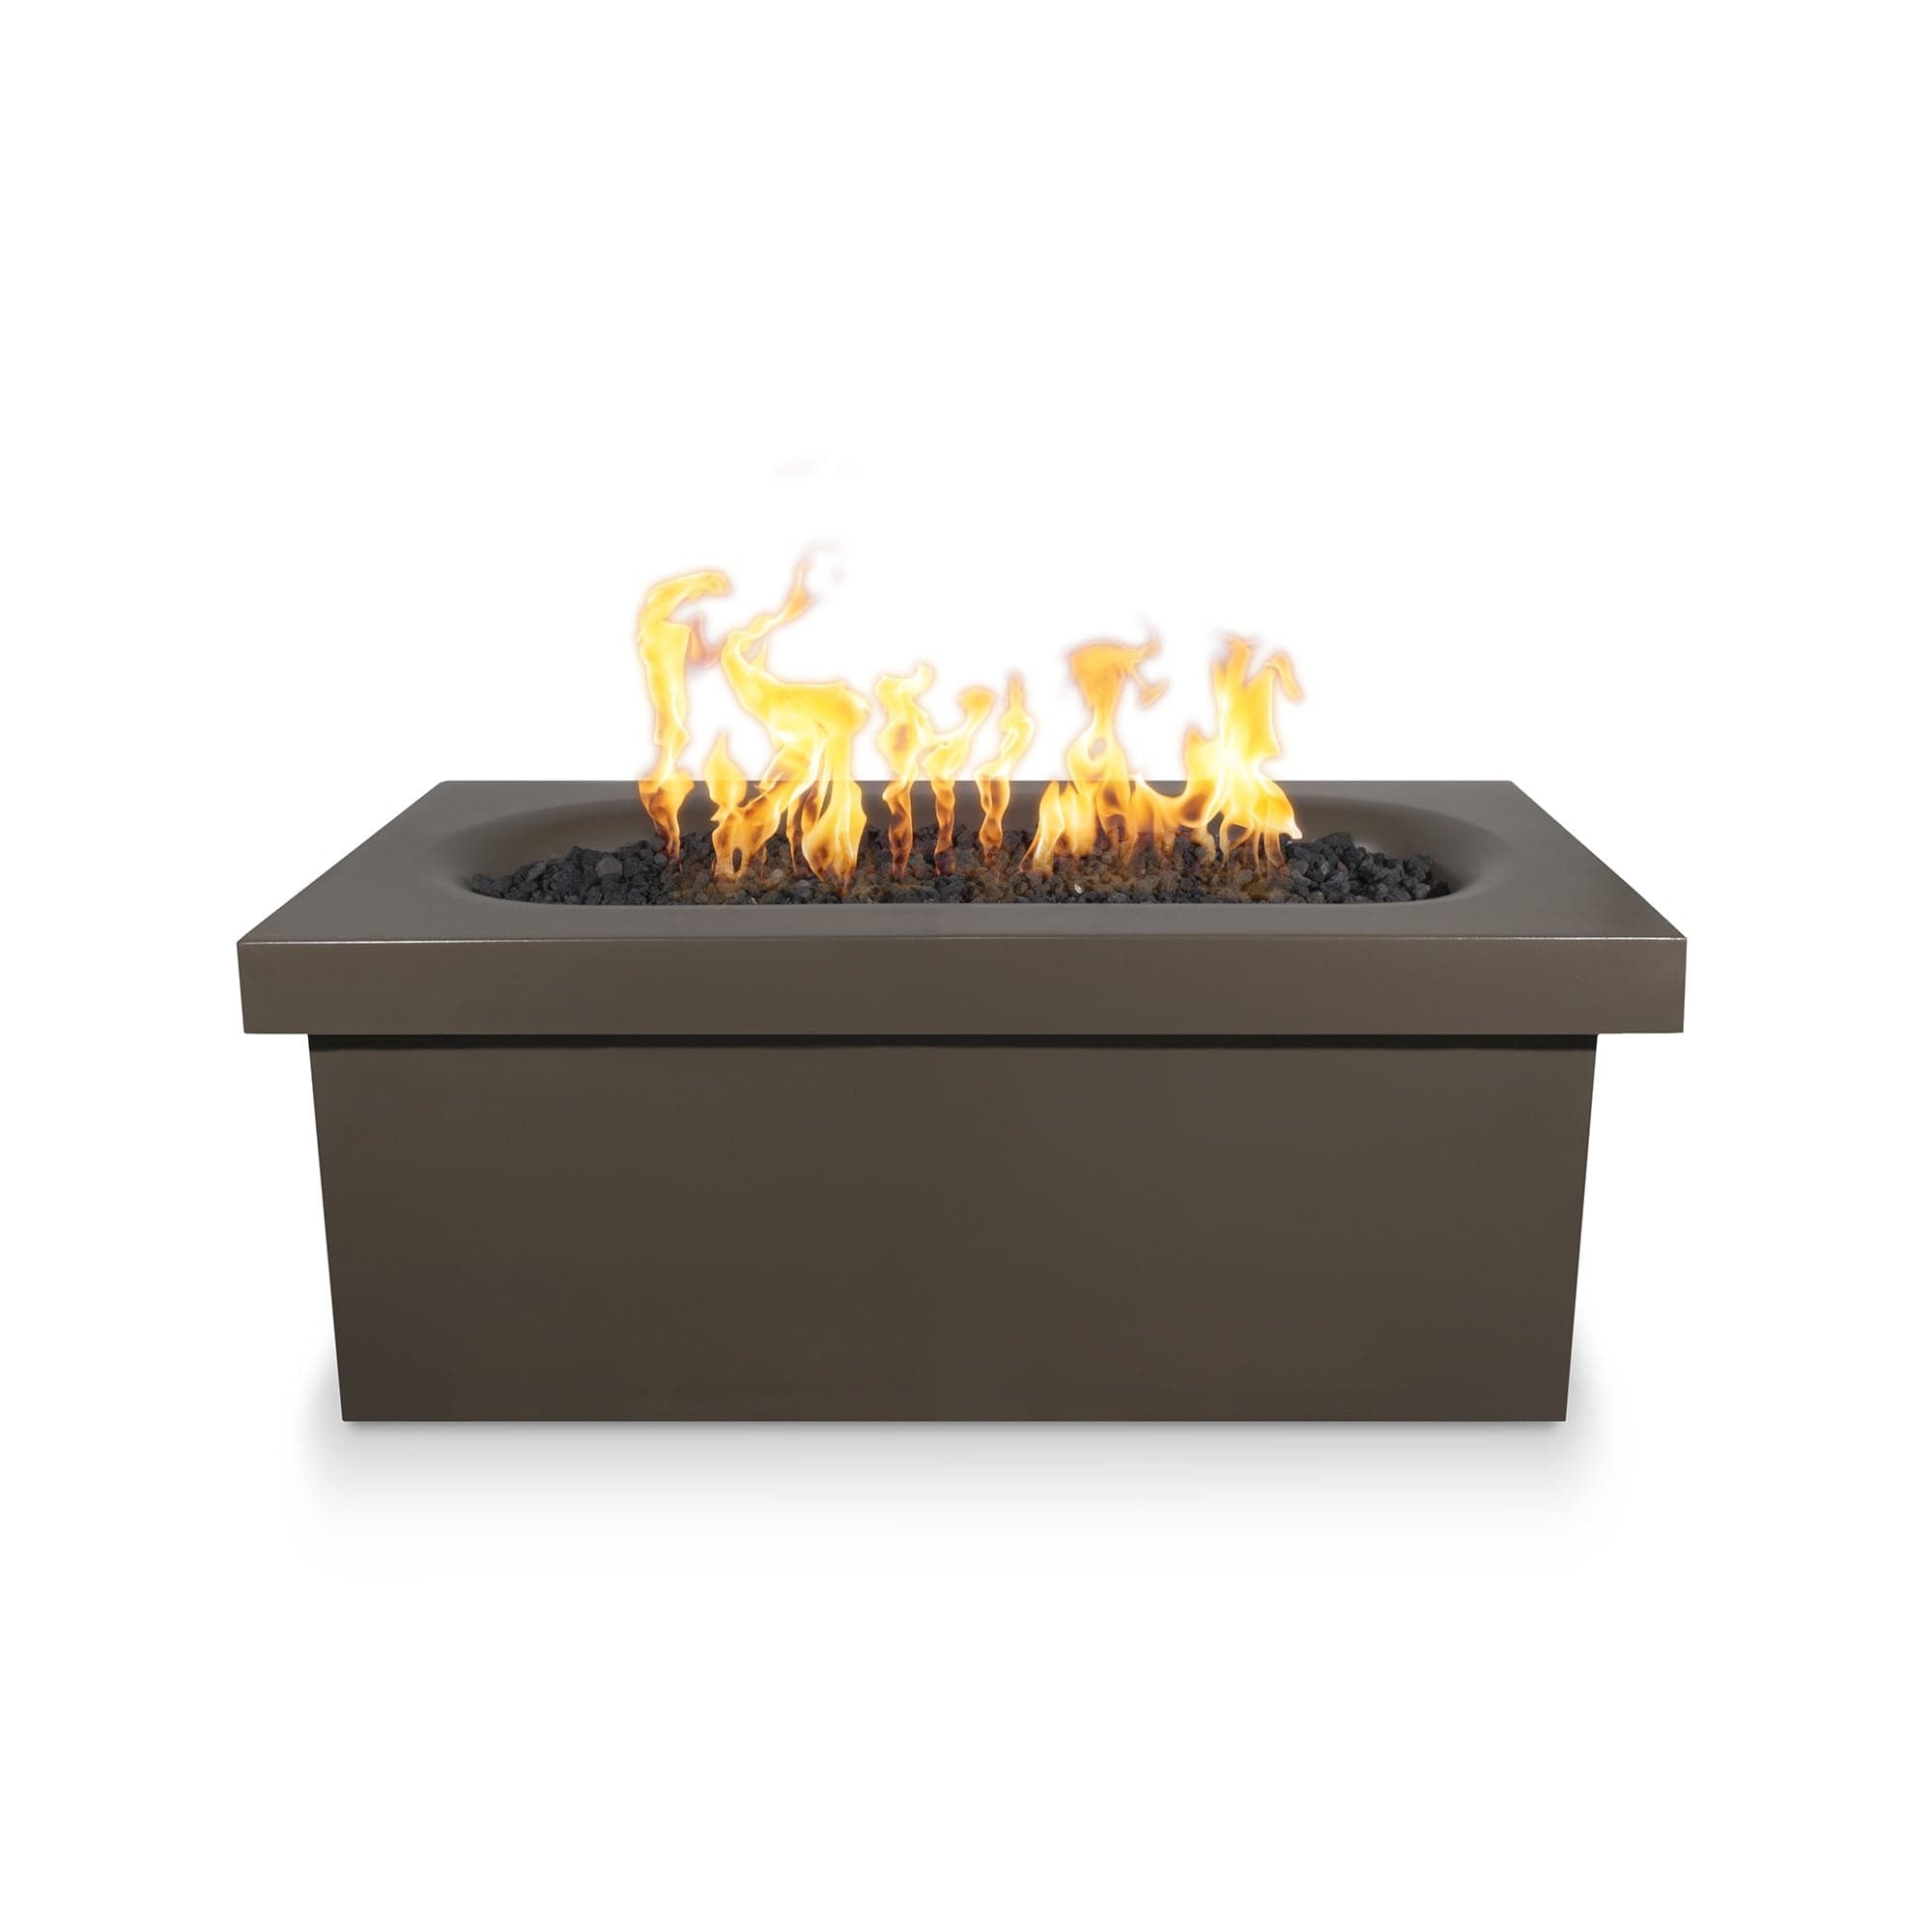 The Outdoor Plus Fire Pit 60" x 24" / Low Voltage Electronic Ignition The Outdoor Plus Ramona Fire Table | Concrete OPT-RMNRT60E12V